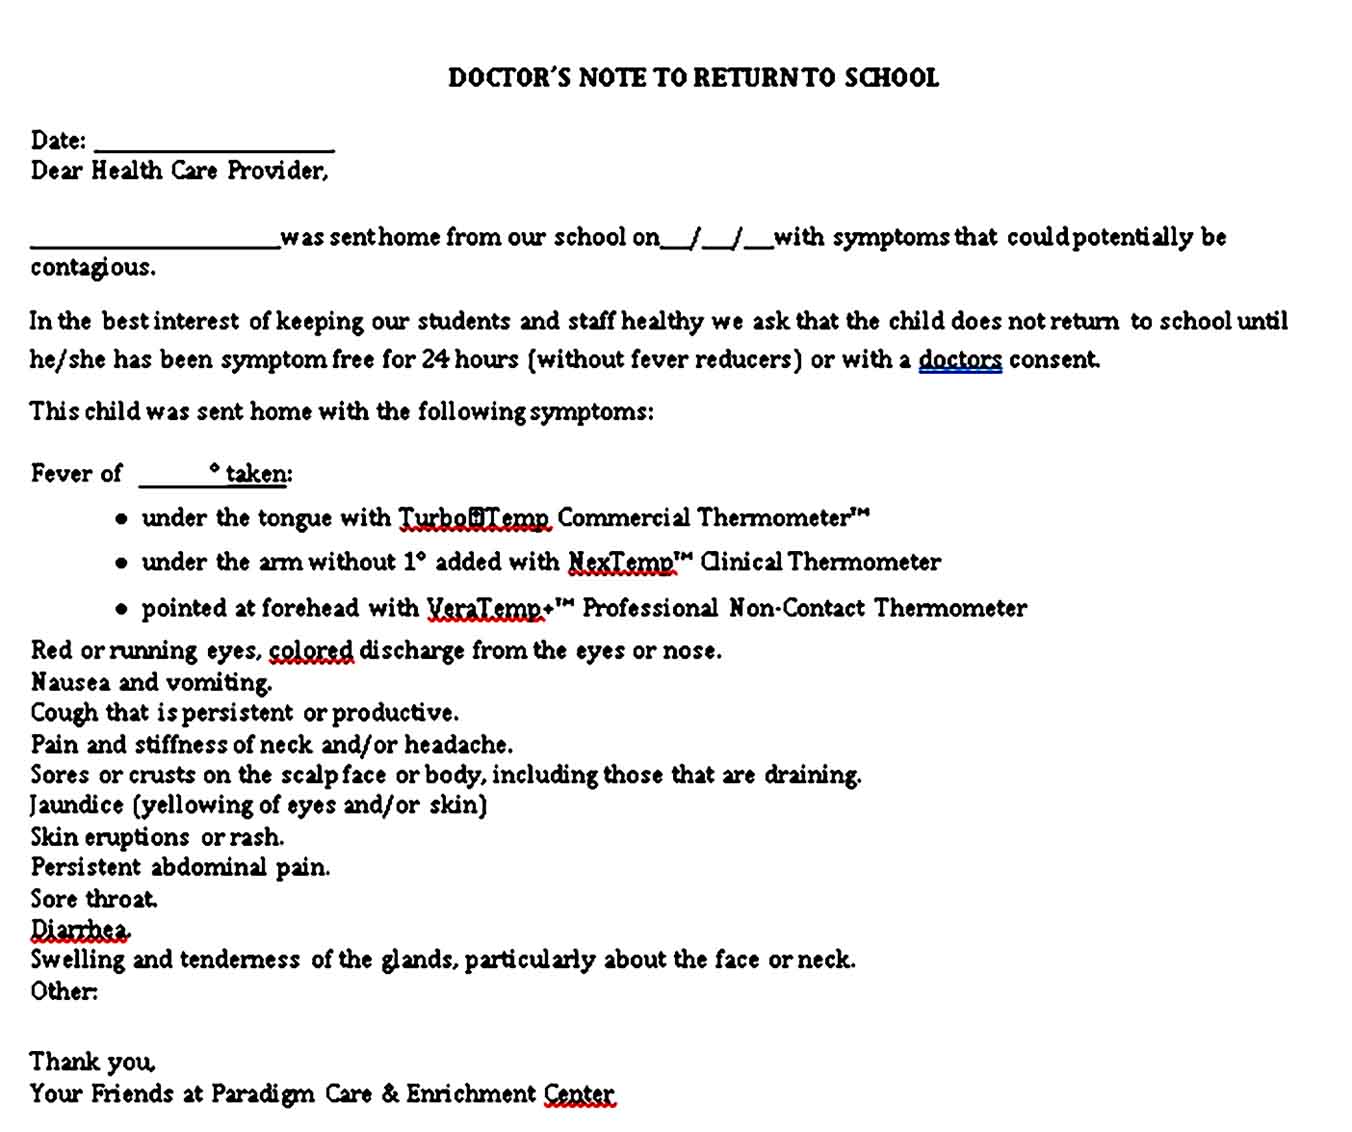 Sample Doctors Note for Student 1